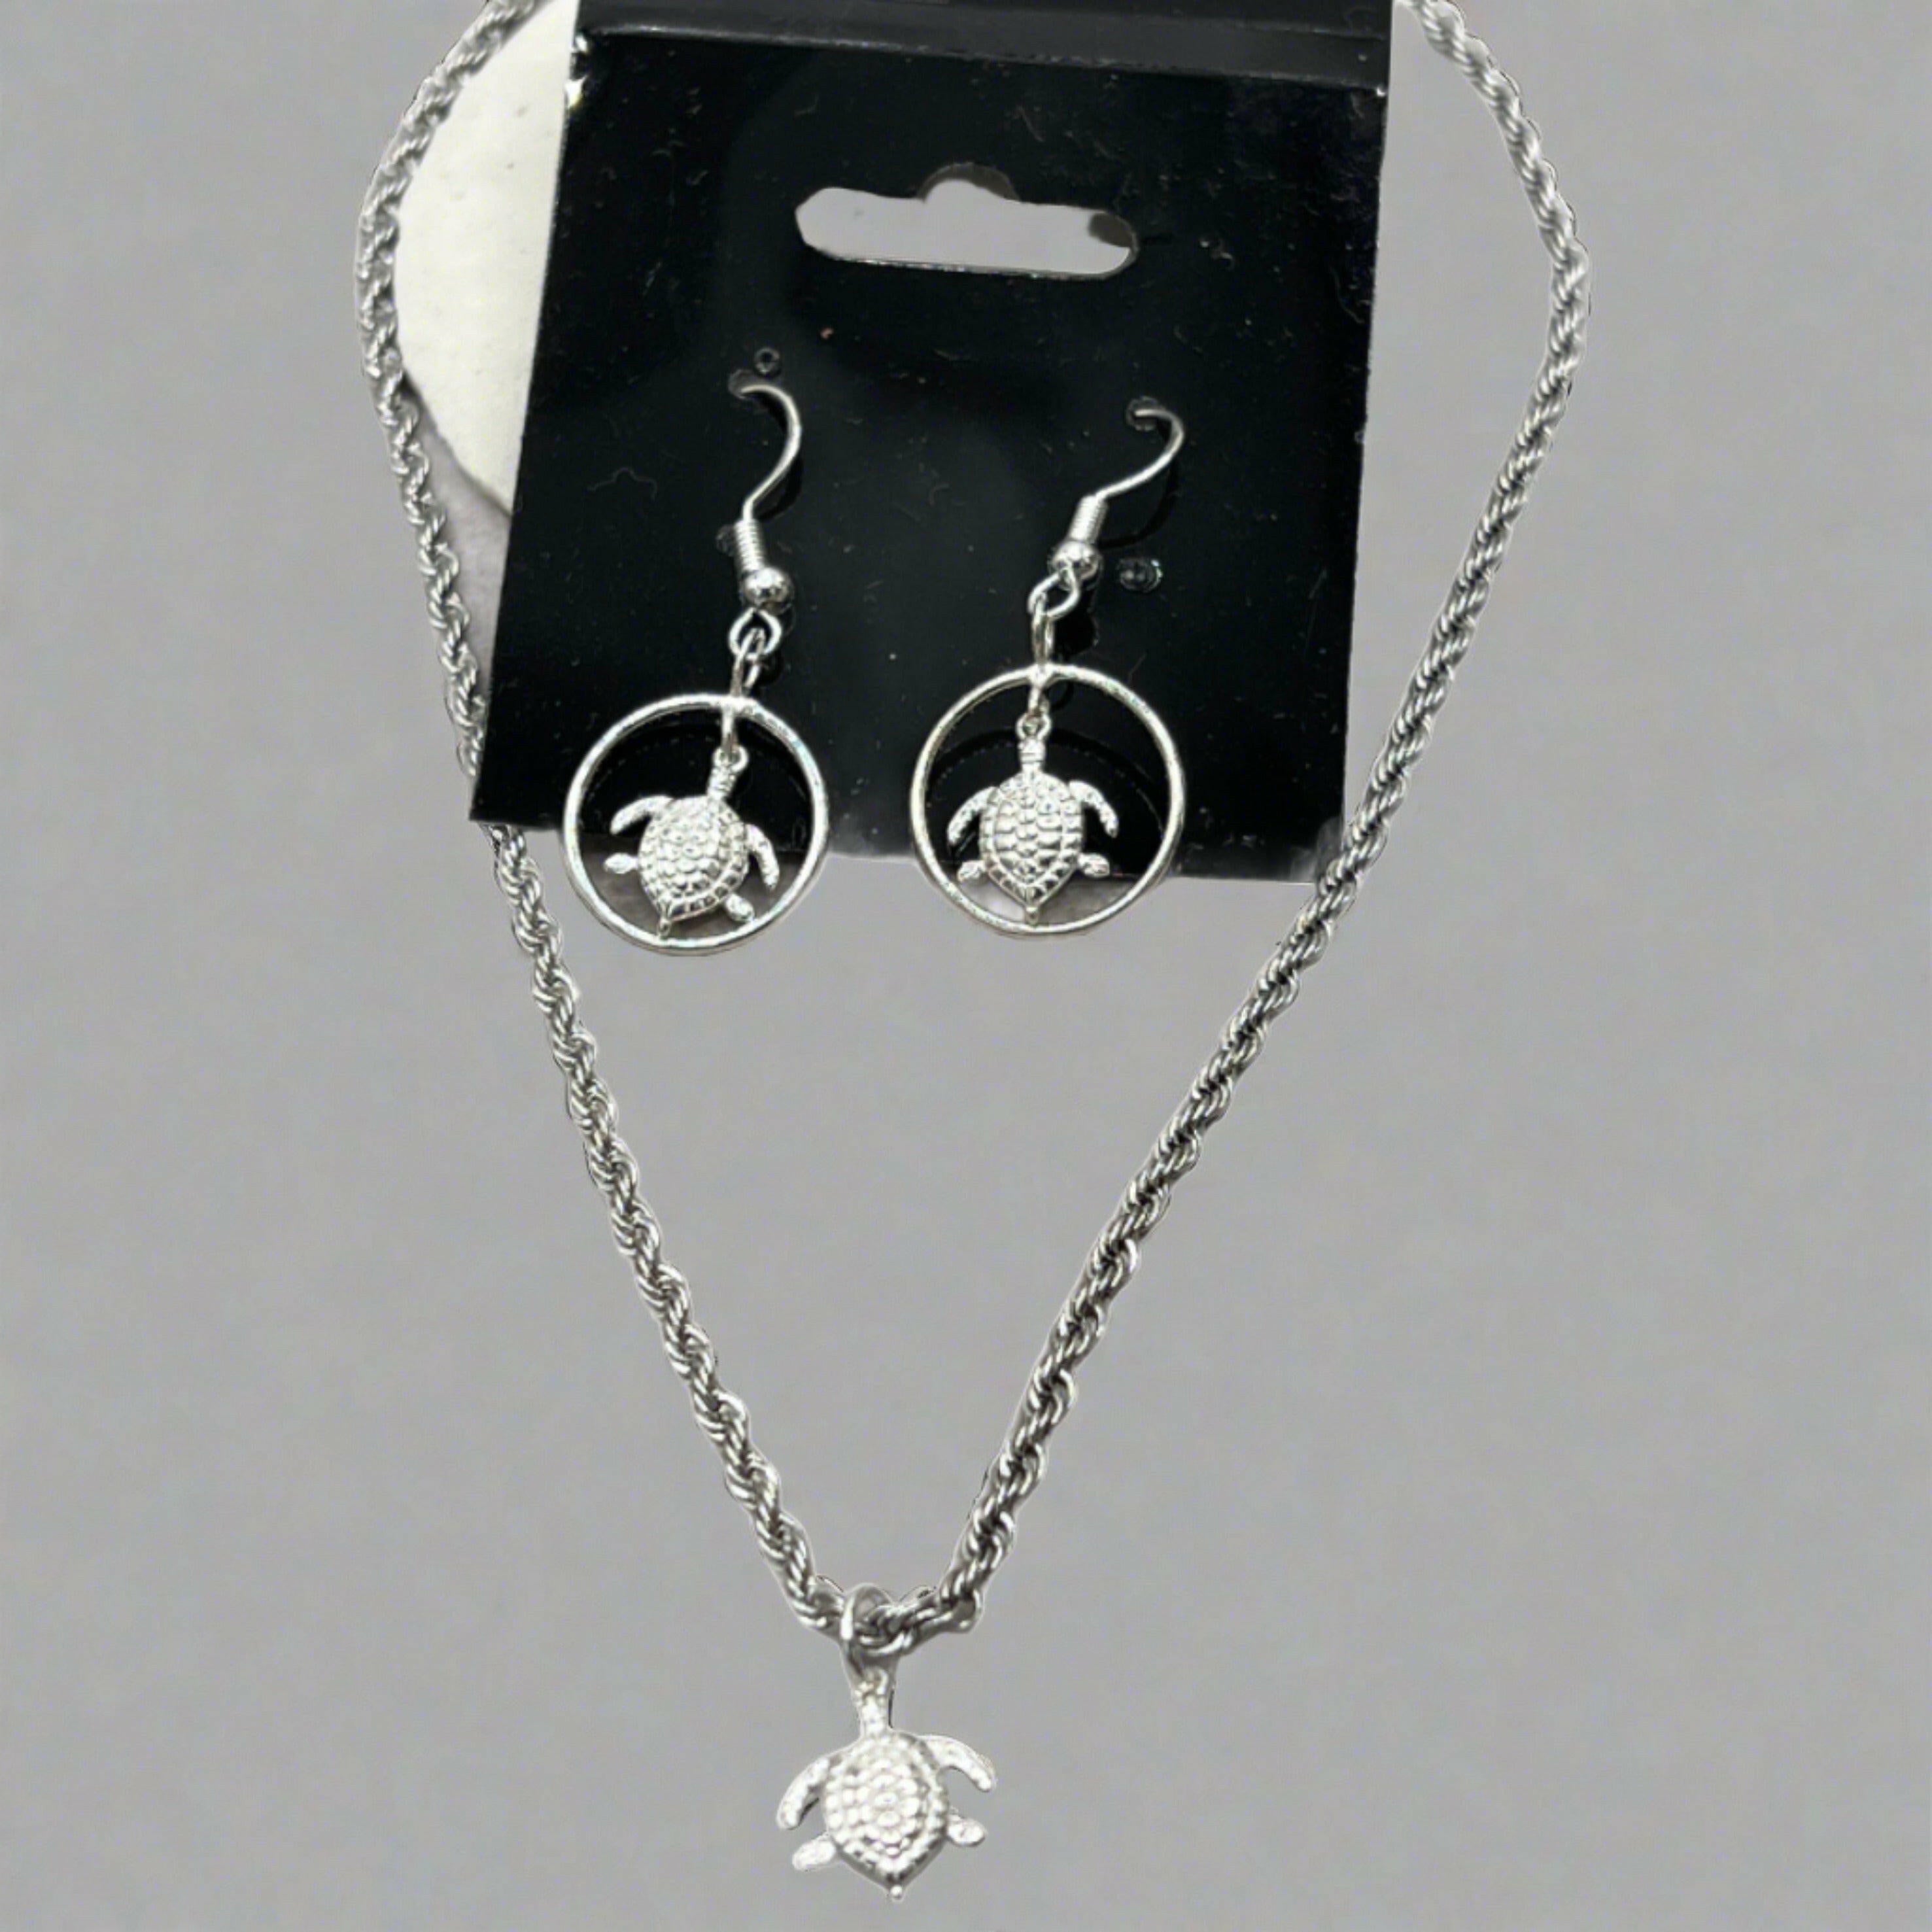 Bec Sue Jewelry Shop necklace and earrings Ocean-Inspired Stainless Steel Turtle Necklace and Earrings Set Tags 640